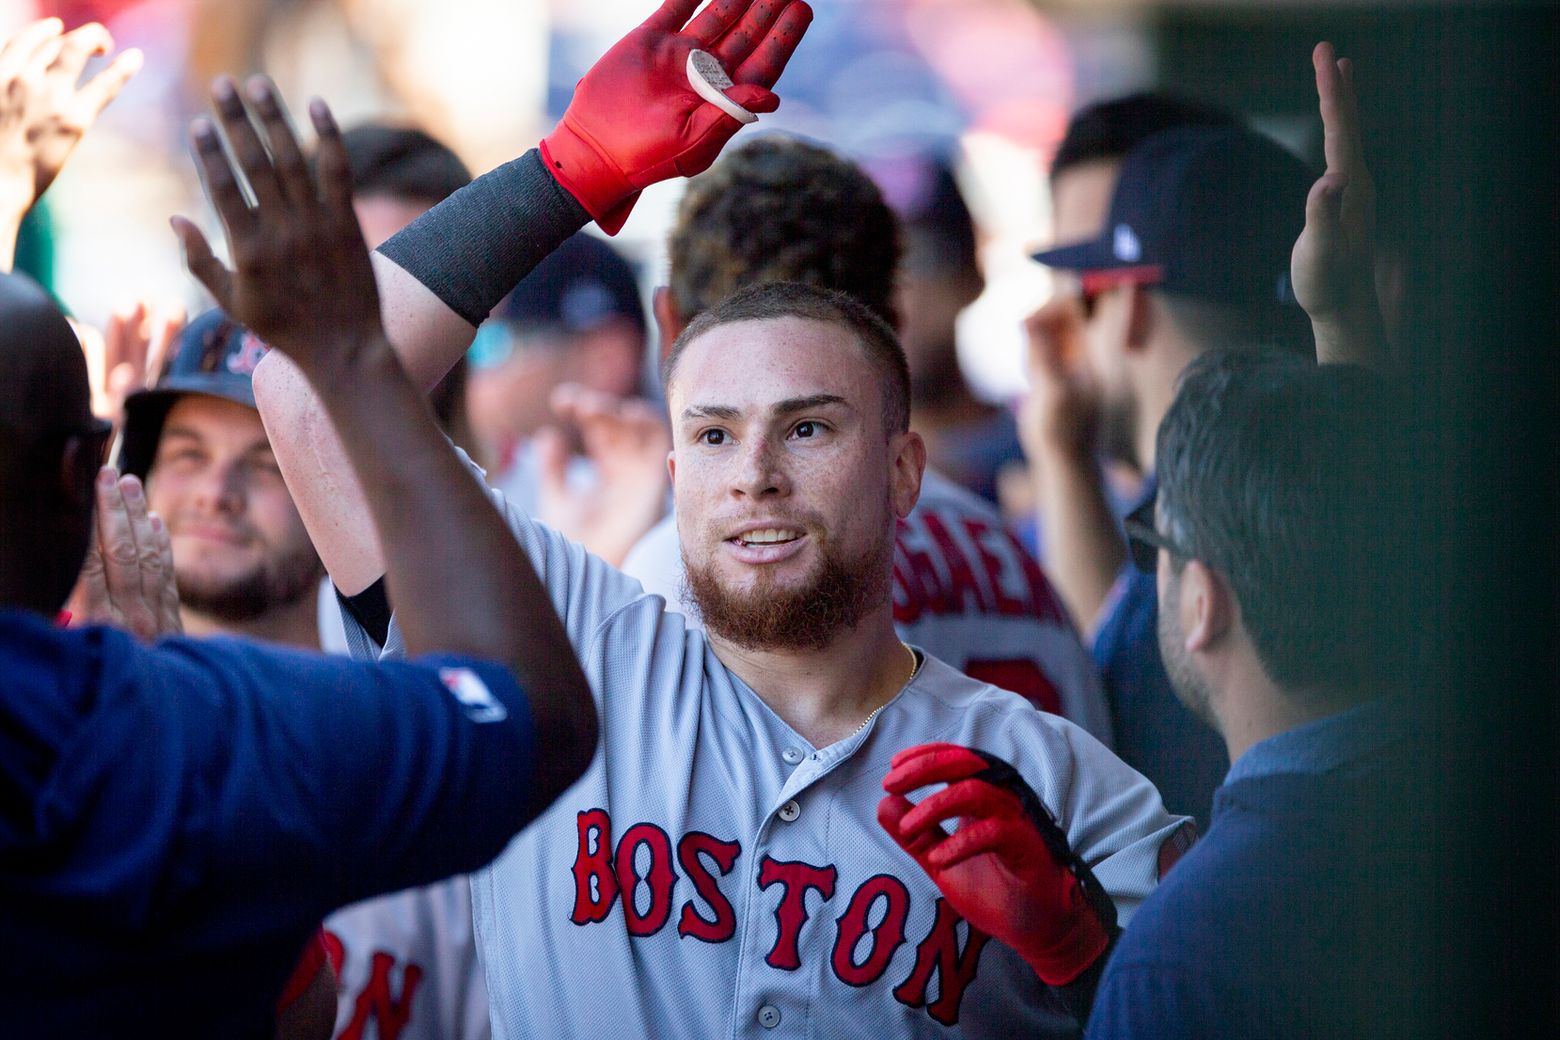 Vázquez homers twice, drives in 5, Red Sox beat Phillies